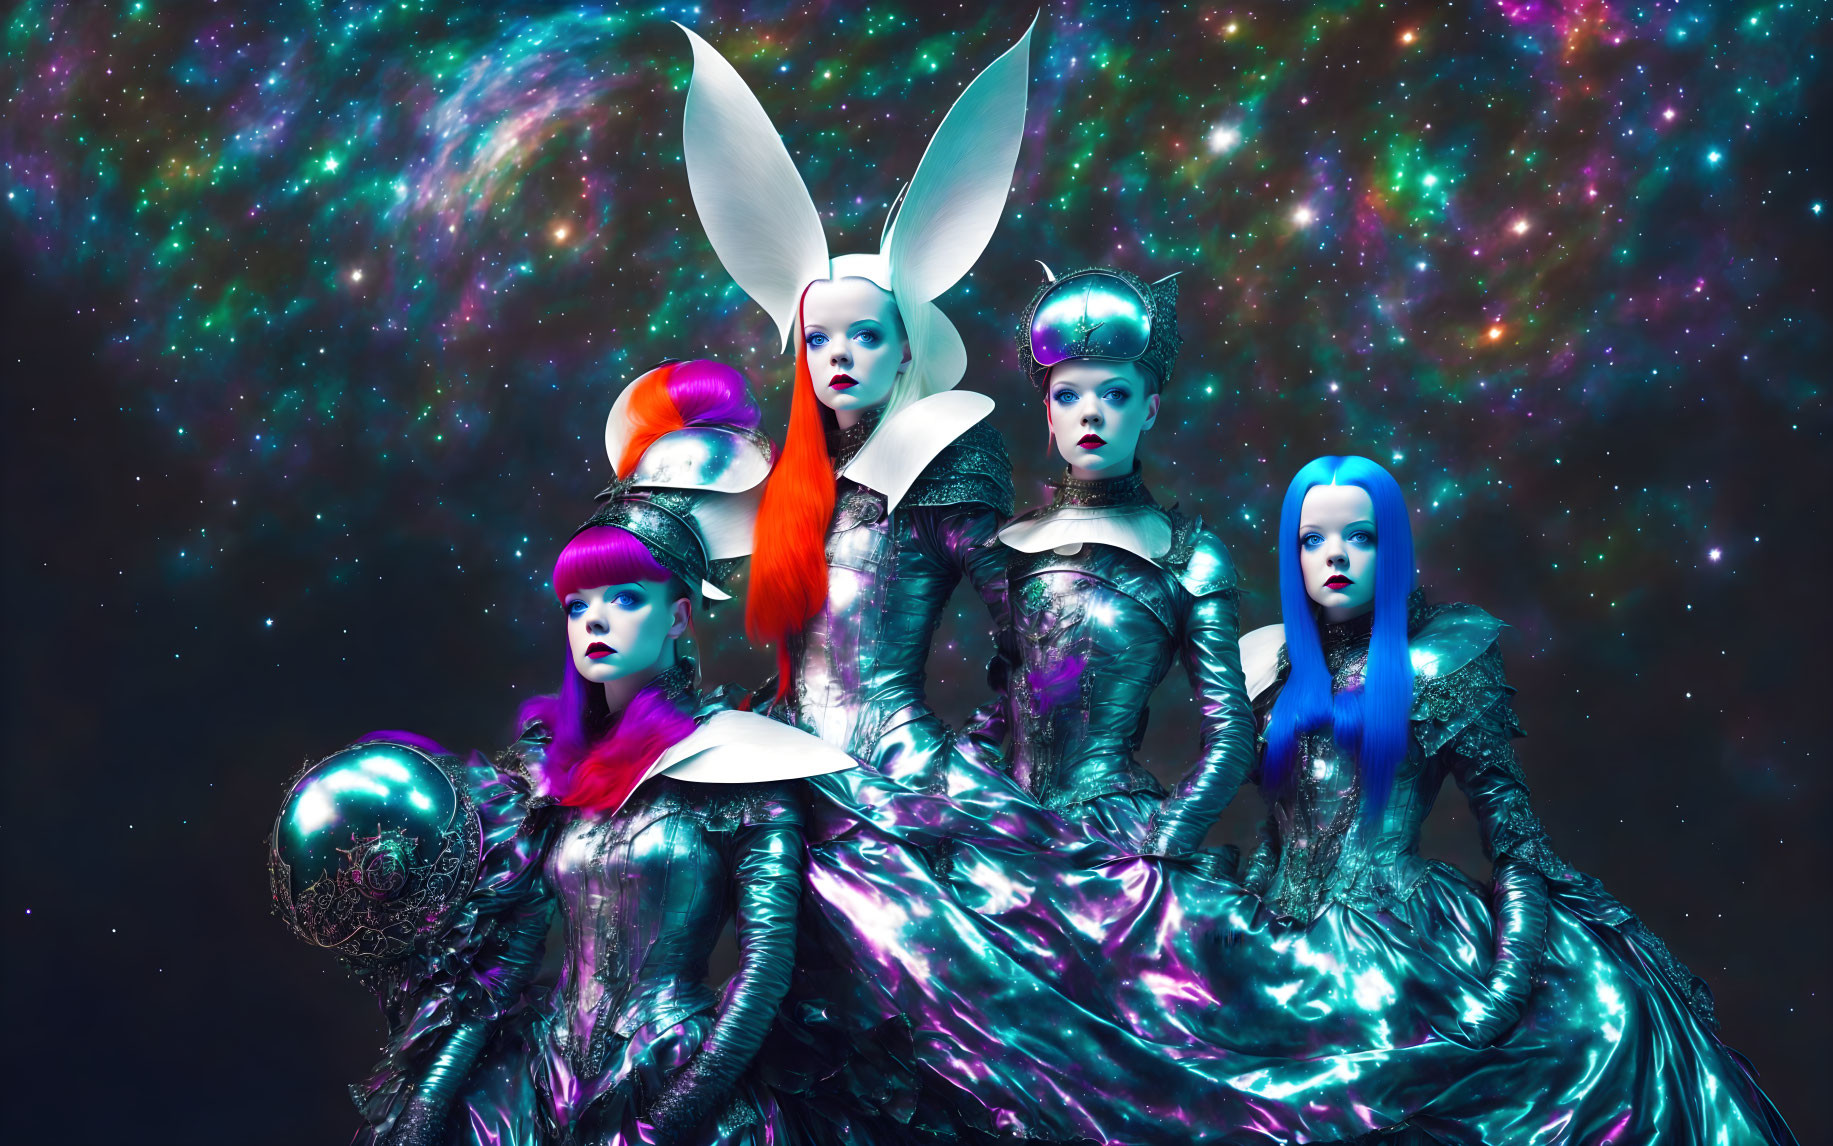 Four models in metallic dresses with bold makeup and headpieces on galaxy backdrop